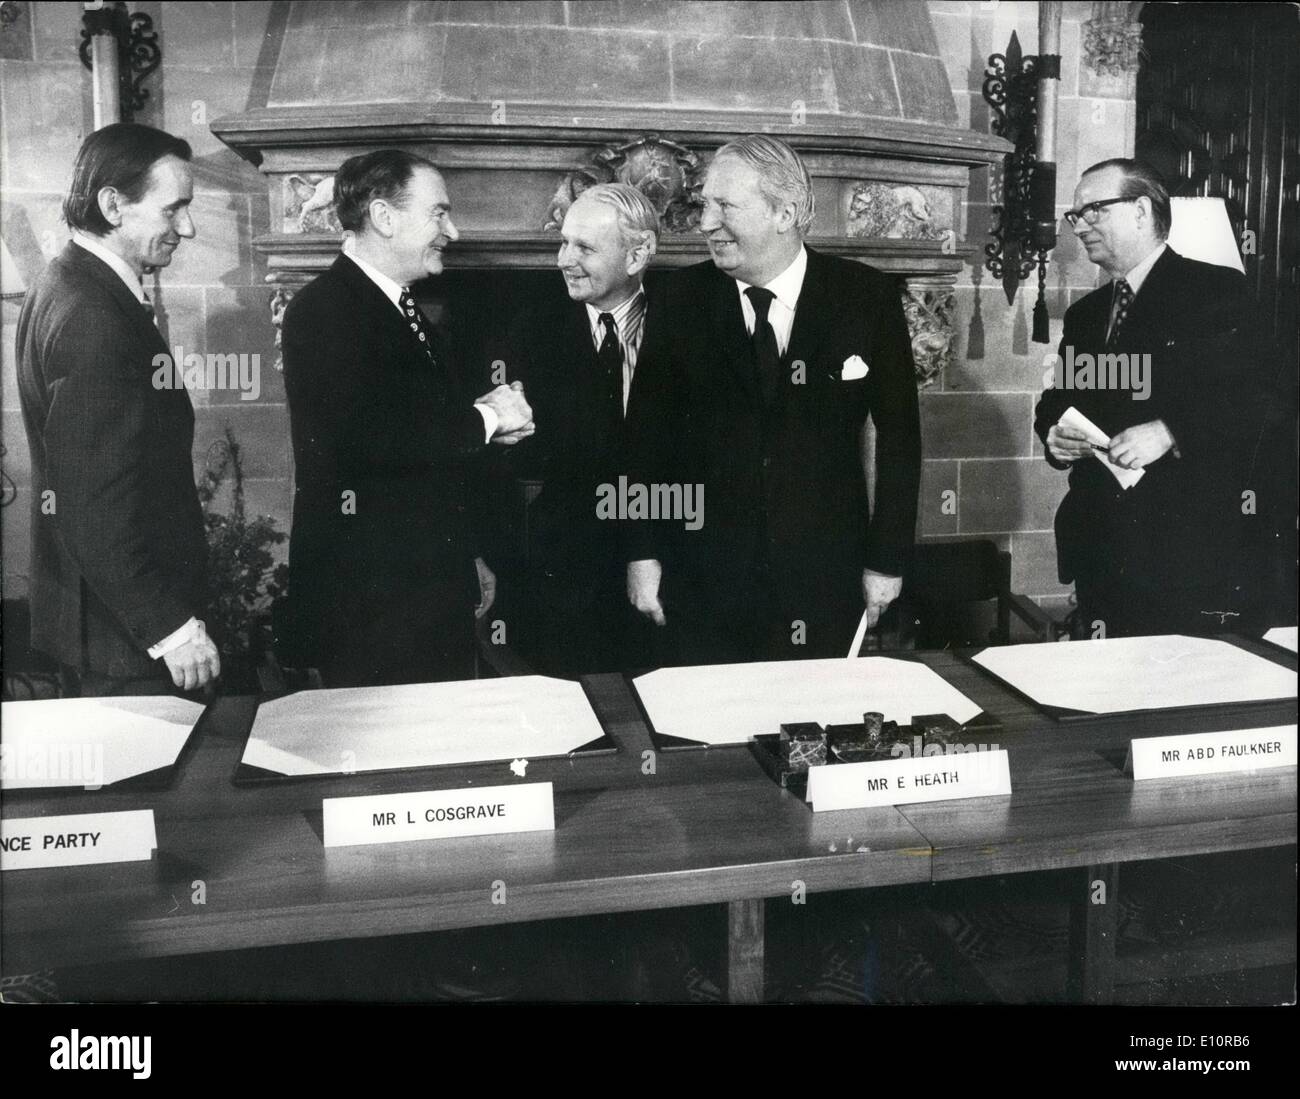 Dec. 12, 1973 - Council of Ireland Agreement.: Agreement on a Council of Ireland - with a core of seven Minister from Eire and seven from Ulster - was reached at the end of talks between political leaders from London, Dublin and Belfast, at Sunningdale last night. After more than 50 hours of bergaining Dublin and Belfast signed and exchanged copies of an agreed communique. The signatories were Mr. Heath. Mr. Cosgrave, Eire's Premier. Mr. Failkner, Chief Executive Designate of Northern Ireland, Mr. Gerry Fitt, leader of the Social Democratic and Labour Party and Mr Stock Photo